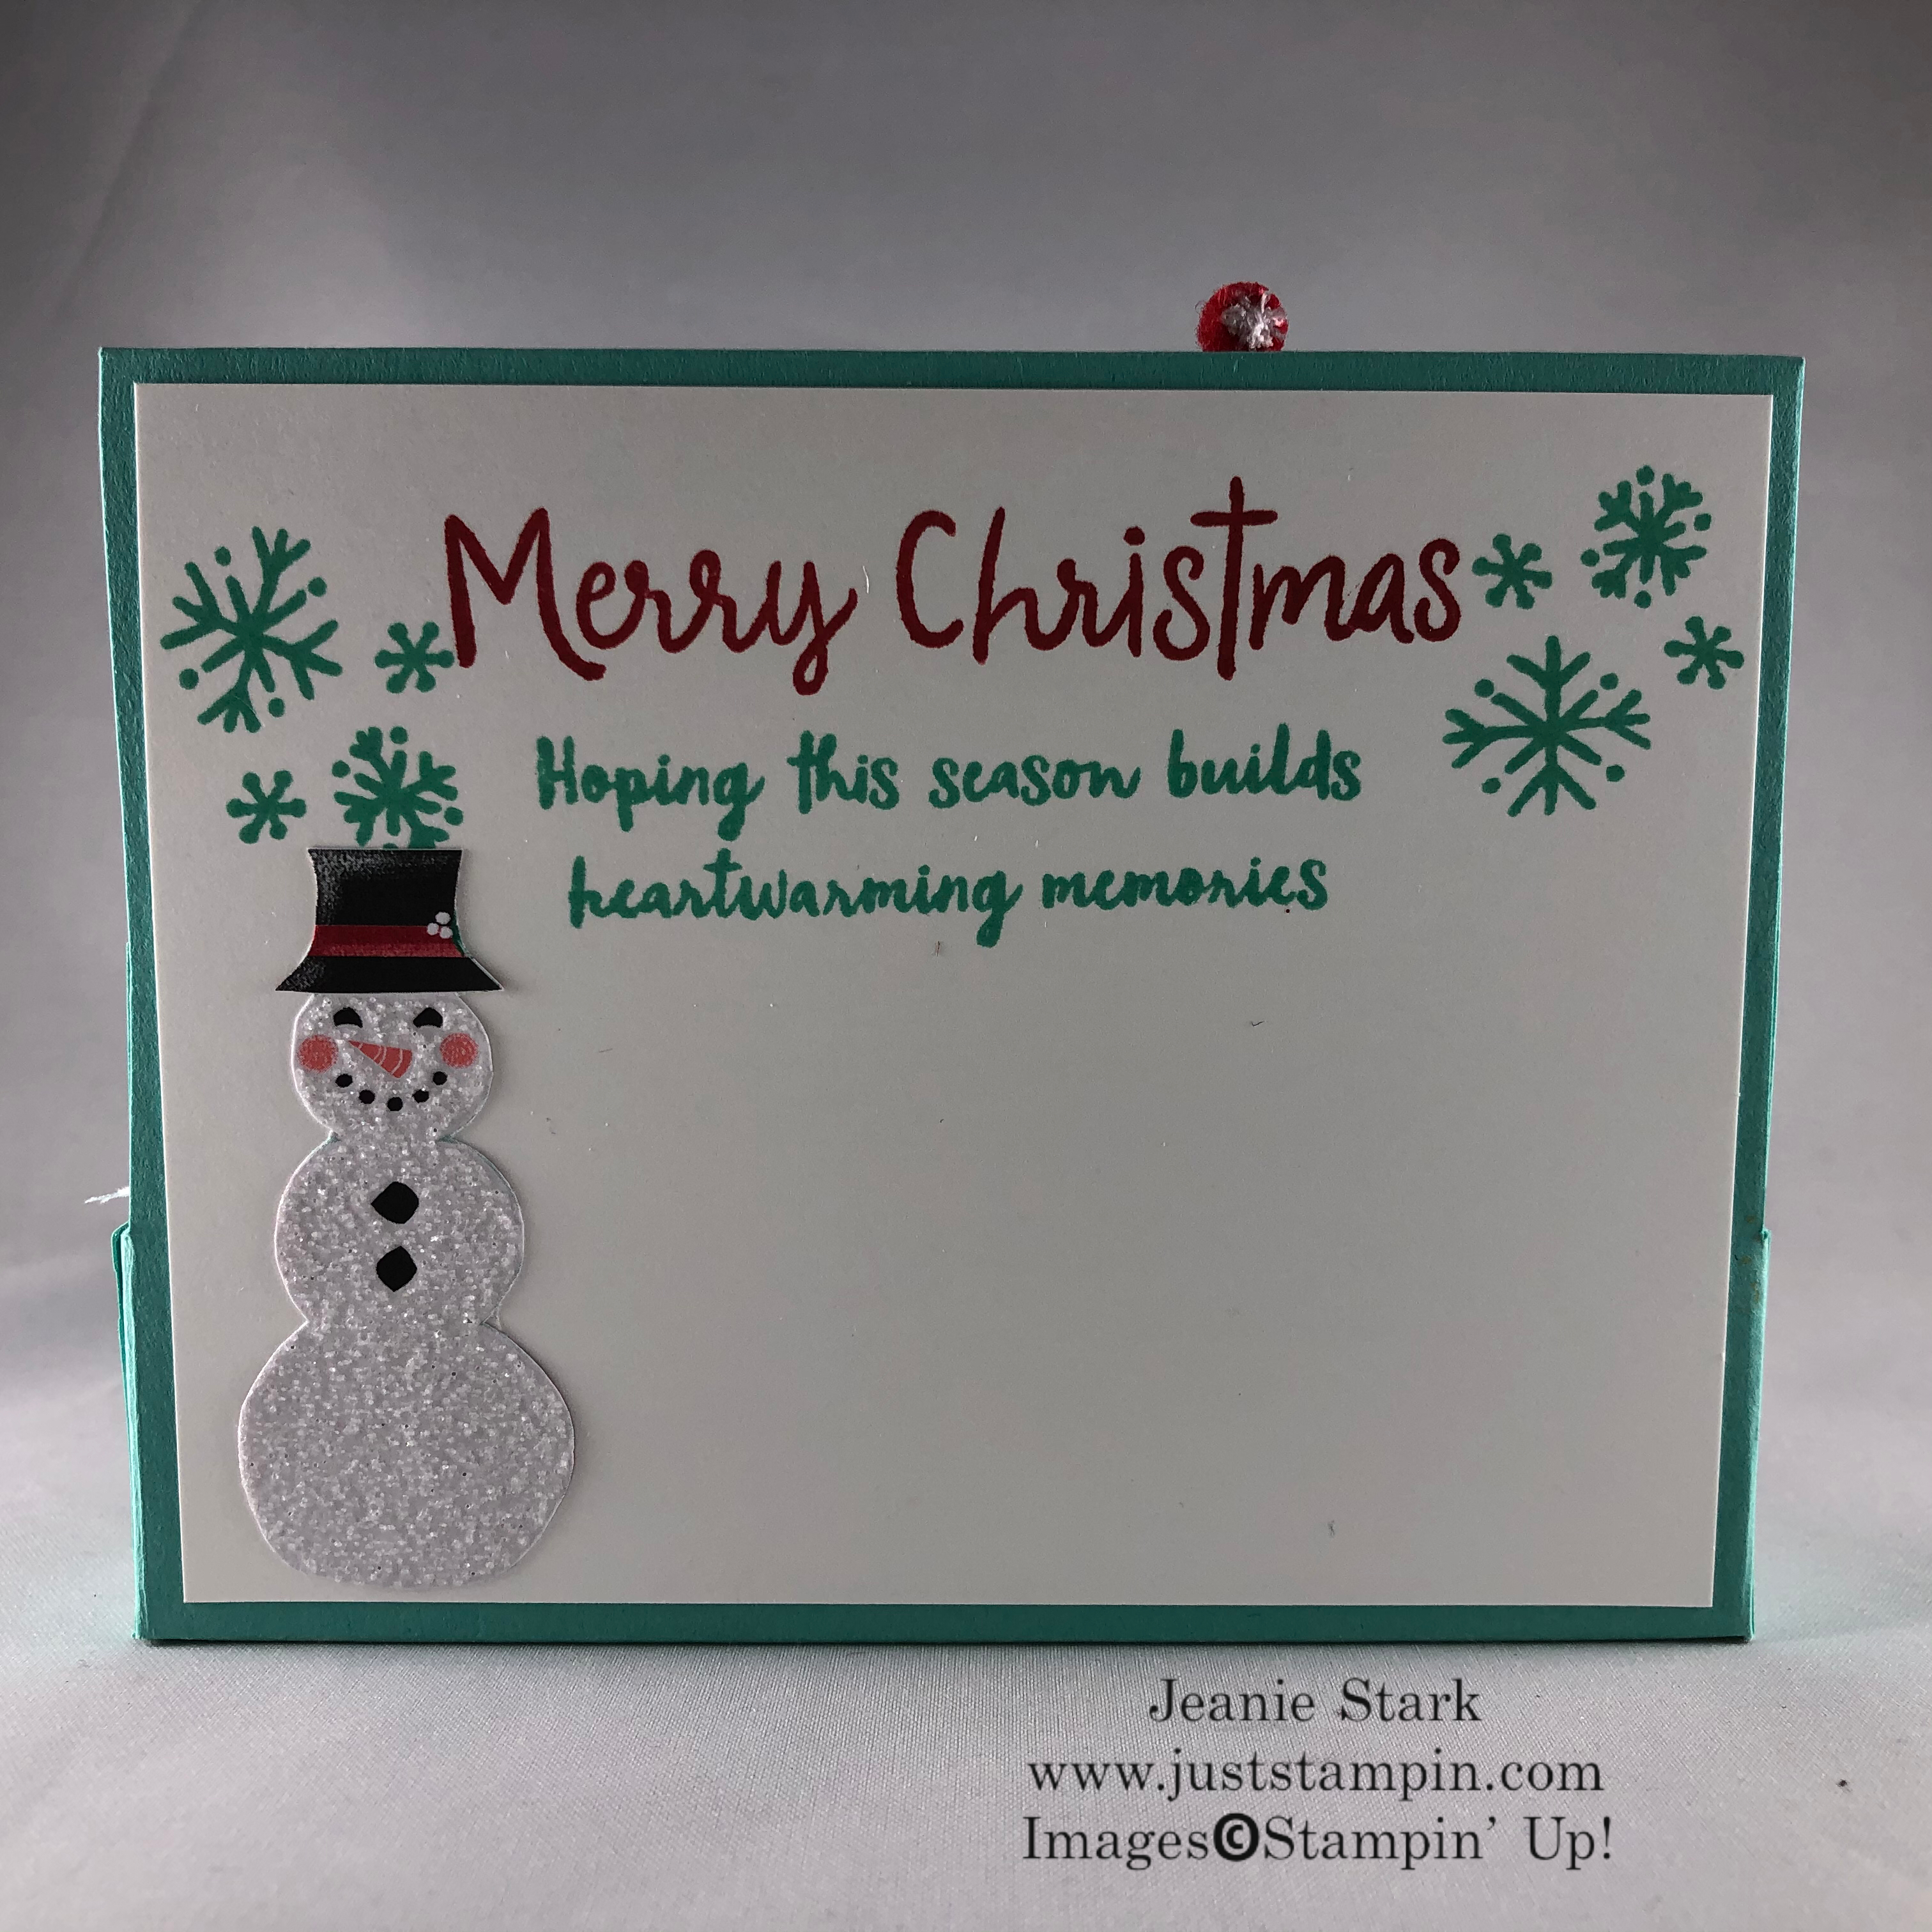 Stampin' Up! Snowman Season Gift Card and Treat Holder idea - Jeanie Stark StampinUp